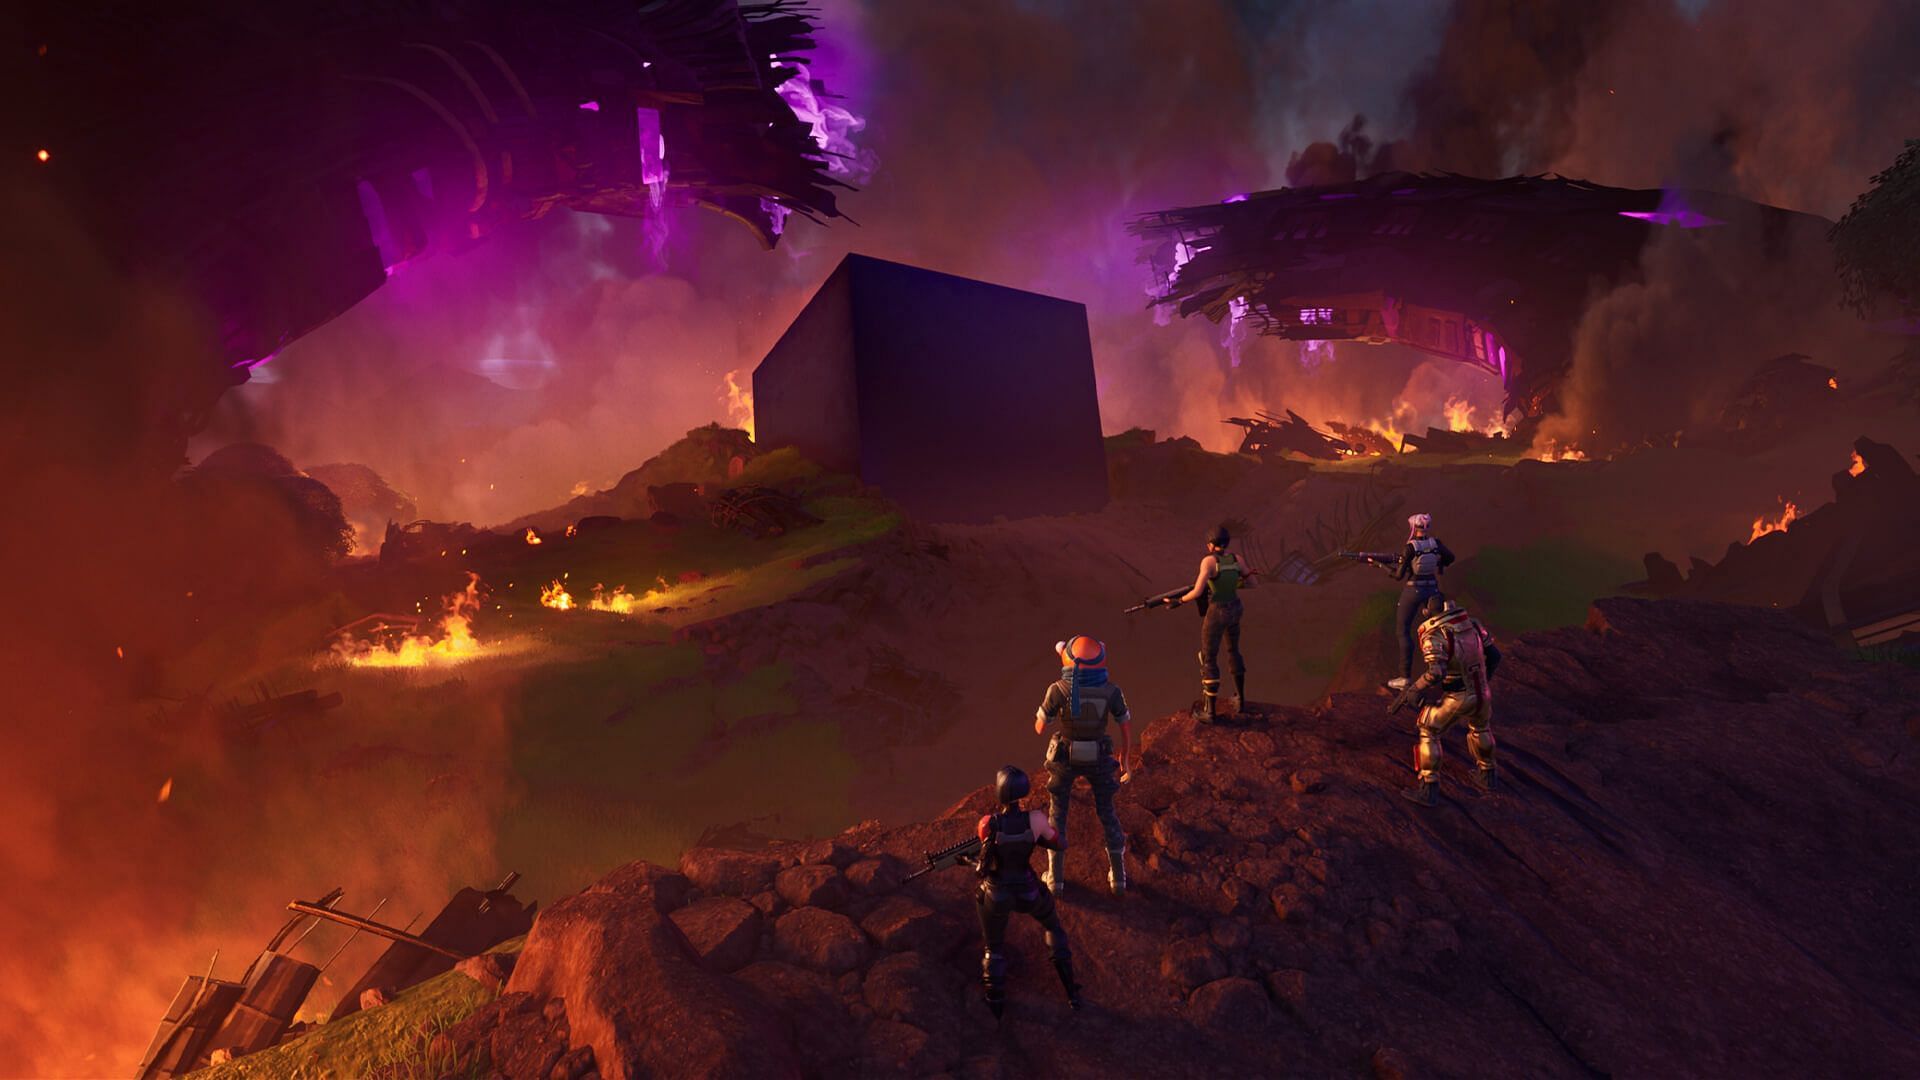 Fortnite corruption is going to take over the entire island (Image via Epic Games)